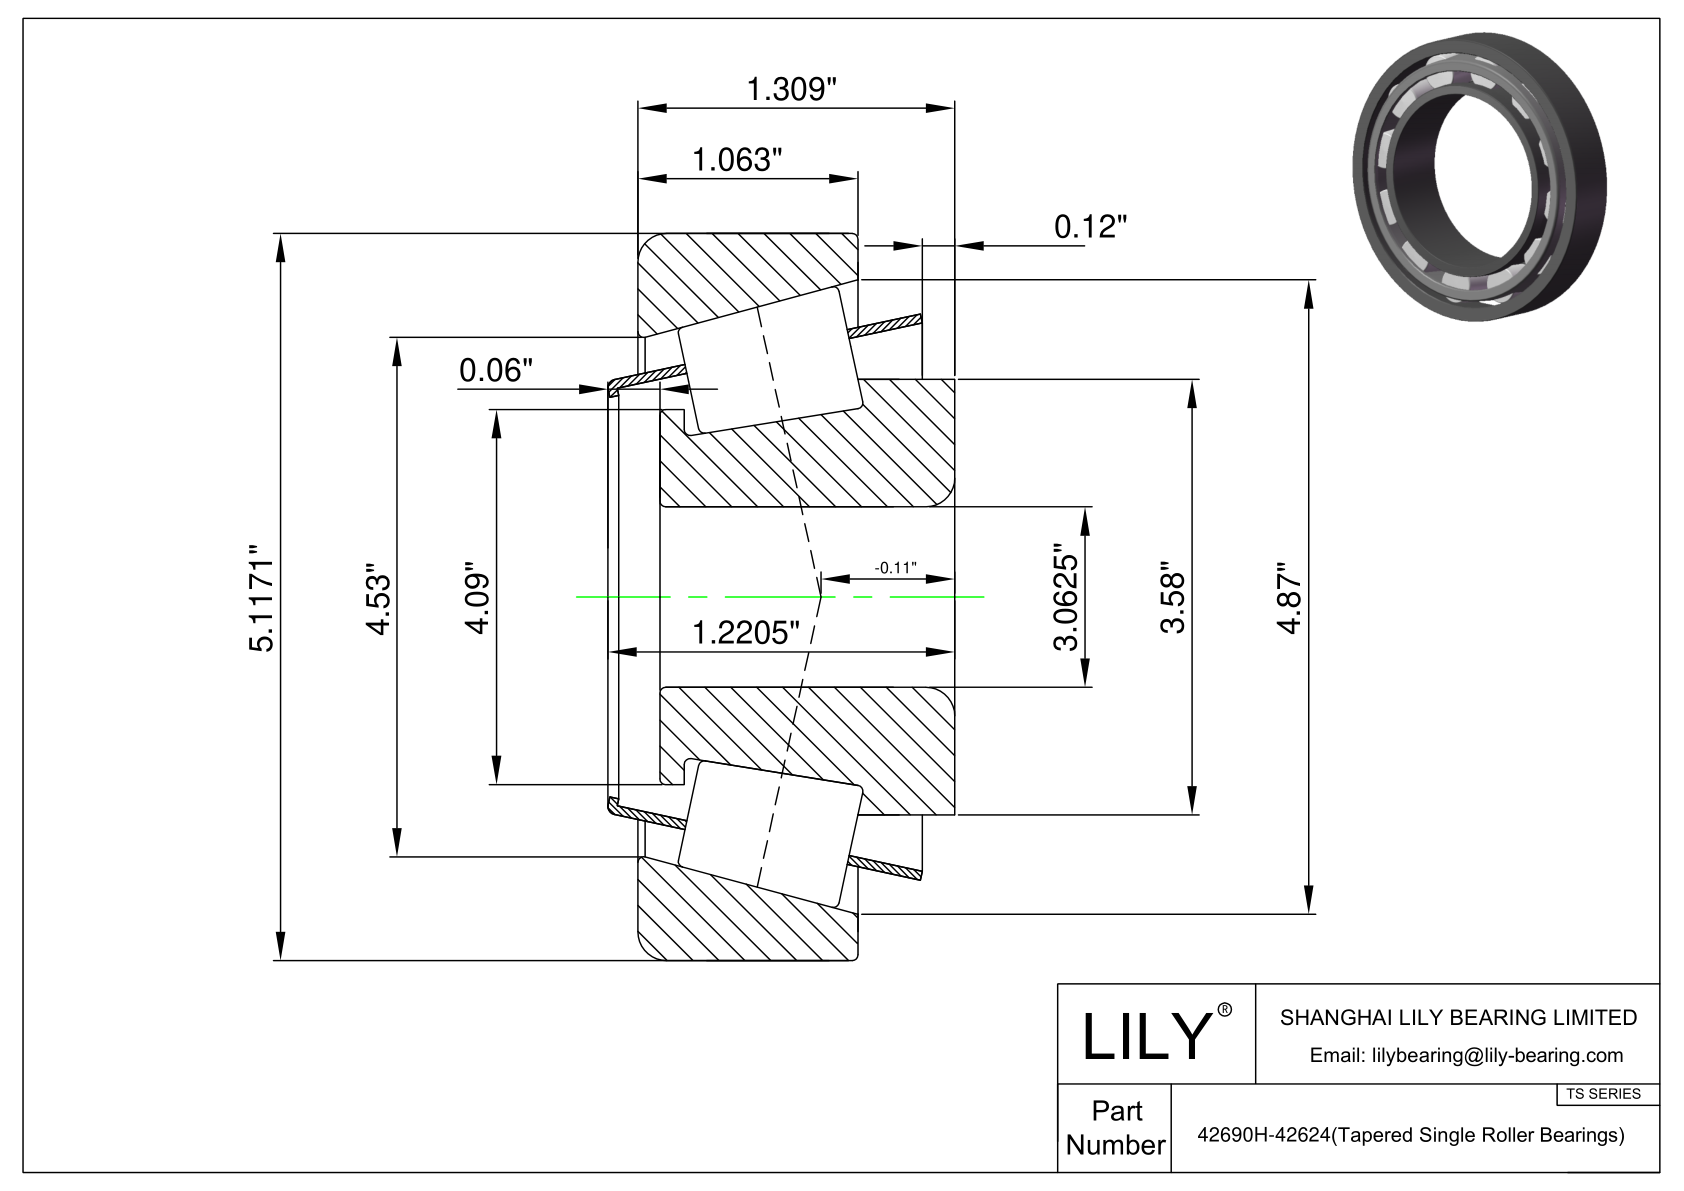 42690H-42624 TS (Tapered Single Roller Bearings) (Imperial) cad drawing